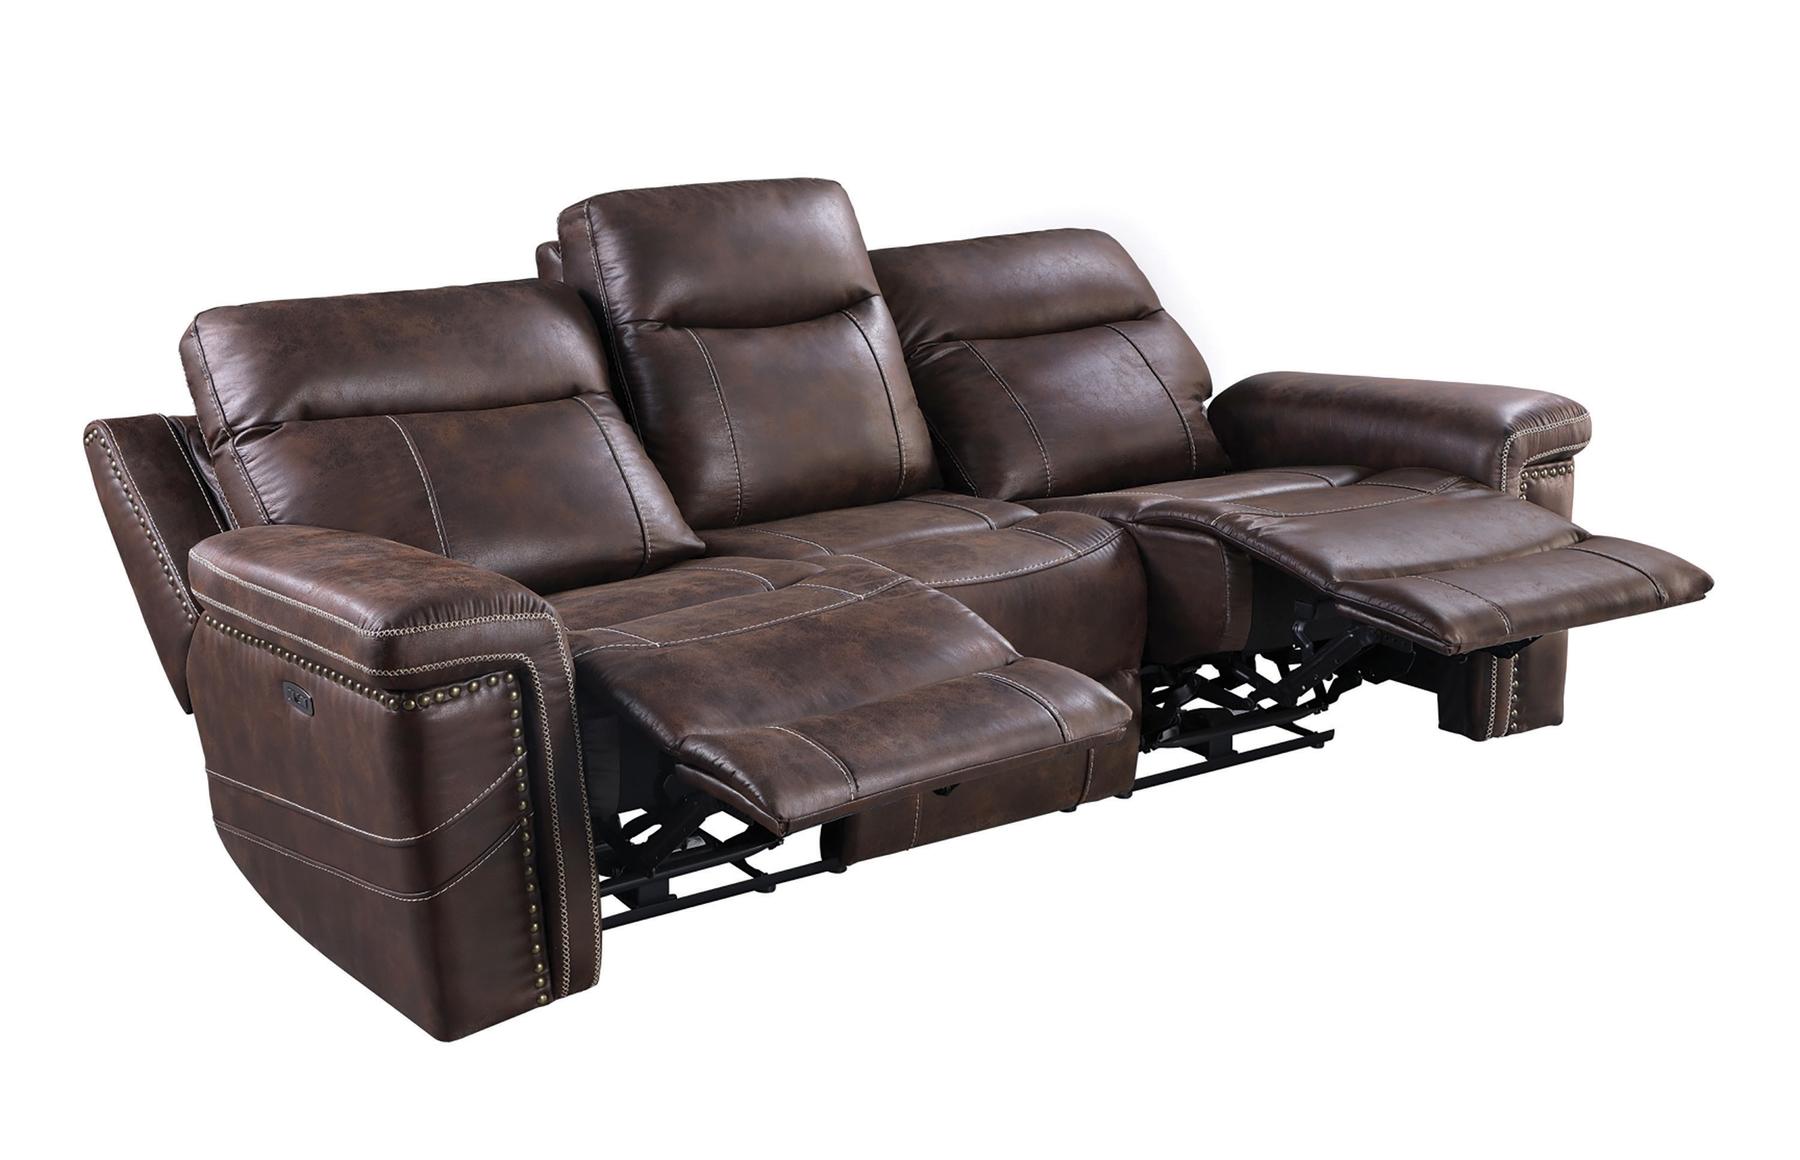 

    
Coaster 603511PP Wixom Power Reclining Sofa Brown 603511PP
